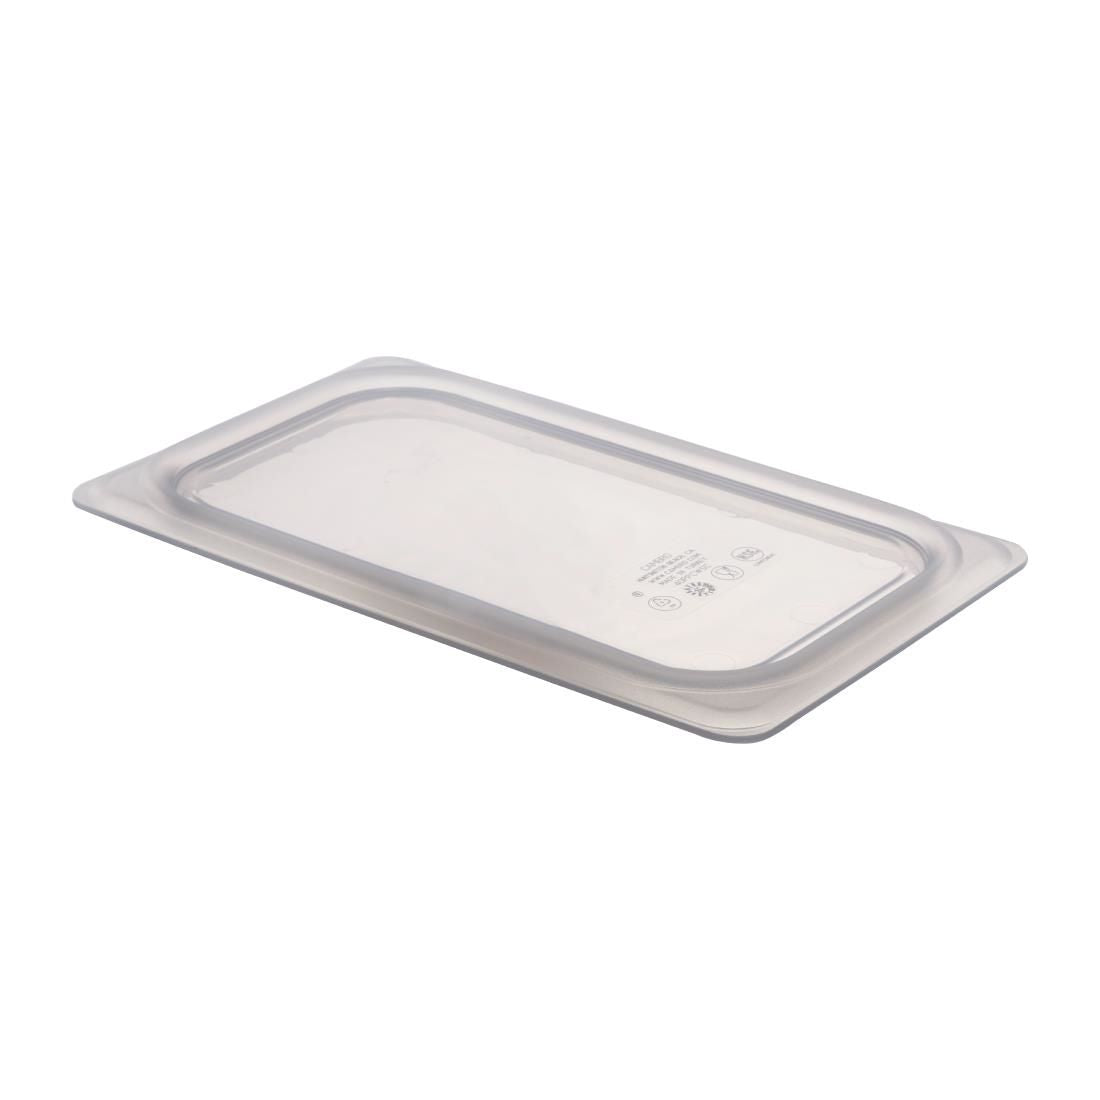 DM751 Cambro Polypropylene Gastronorm Pan 1/4 Soft Seal Lid JD Catering Equipment Solutions Ltd